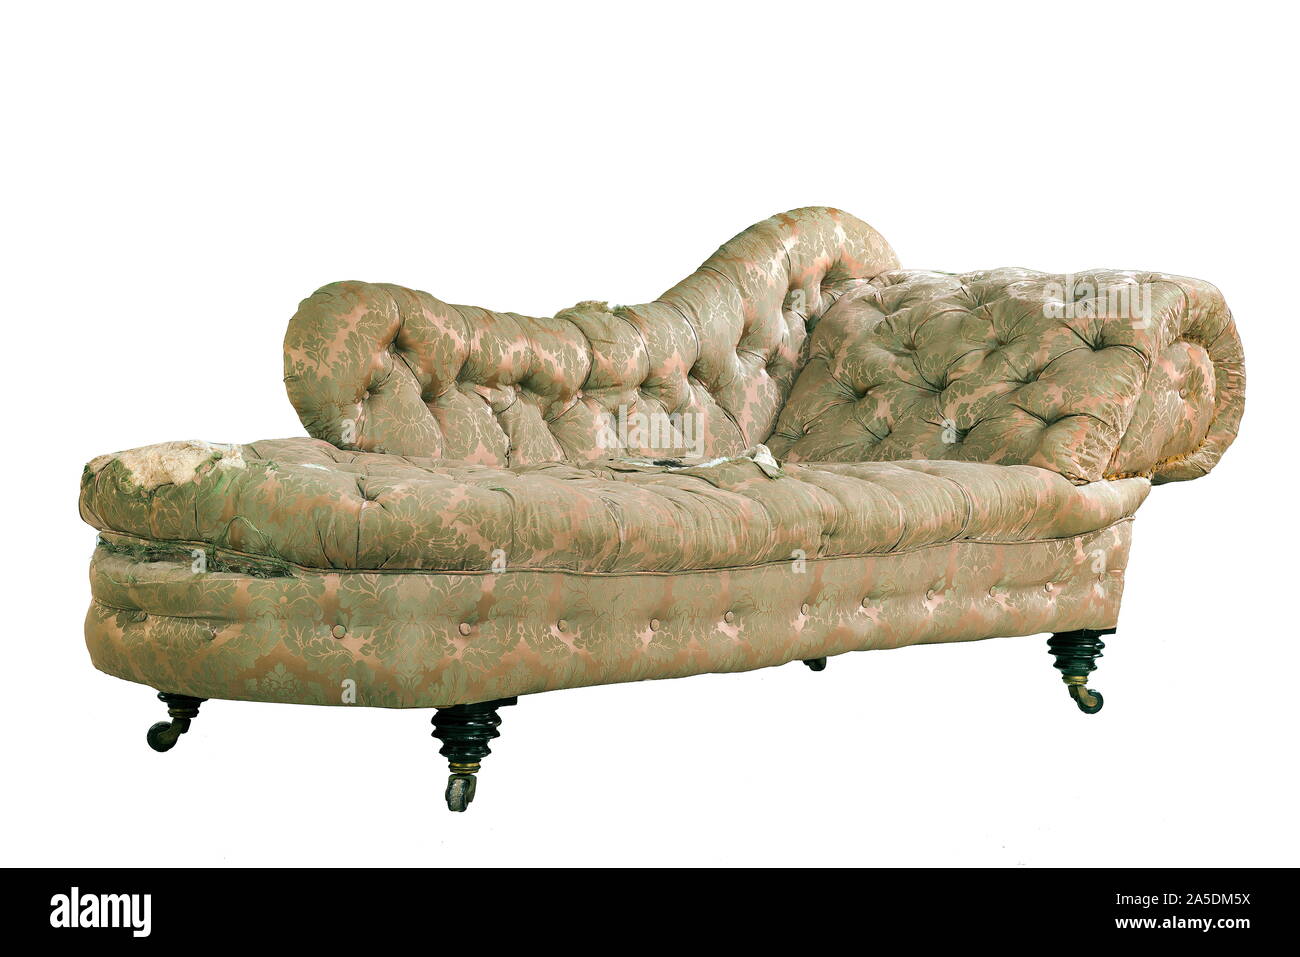 Vintage chaise longue shabby in need or re-upholstery isolated on white  Stock Photo - Alamy